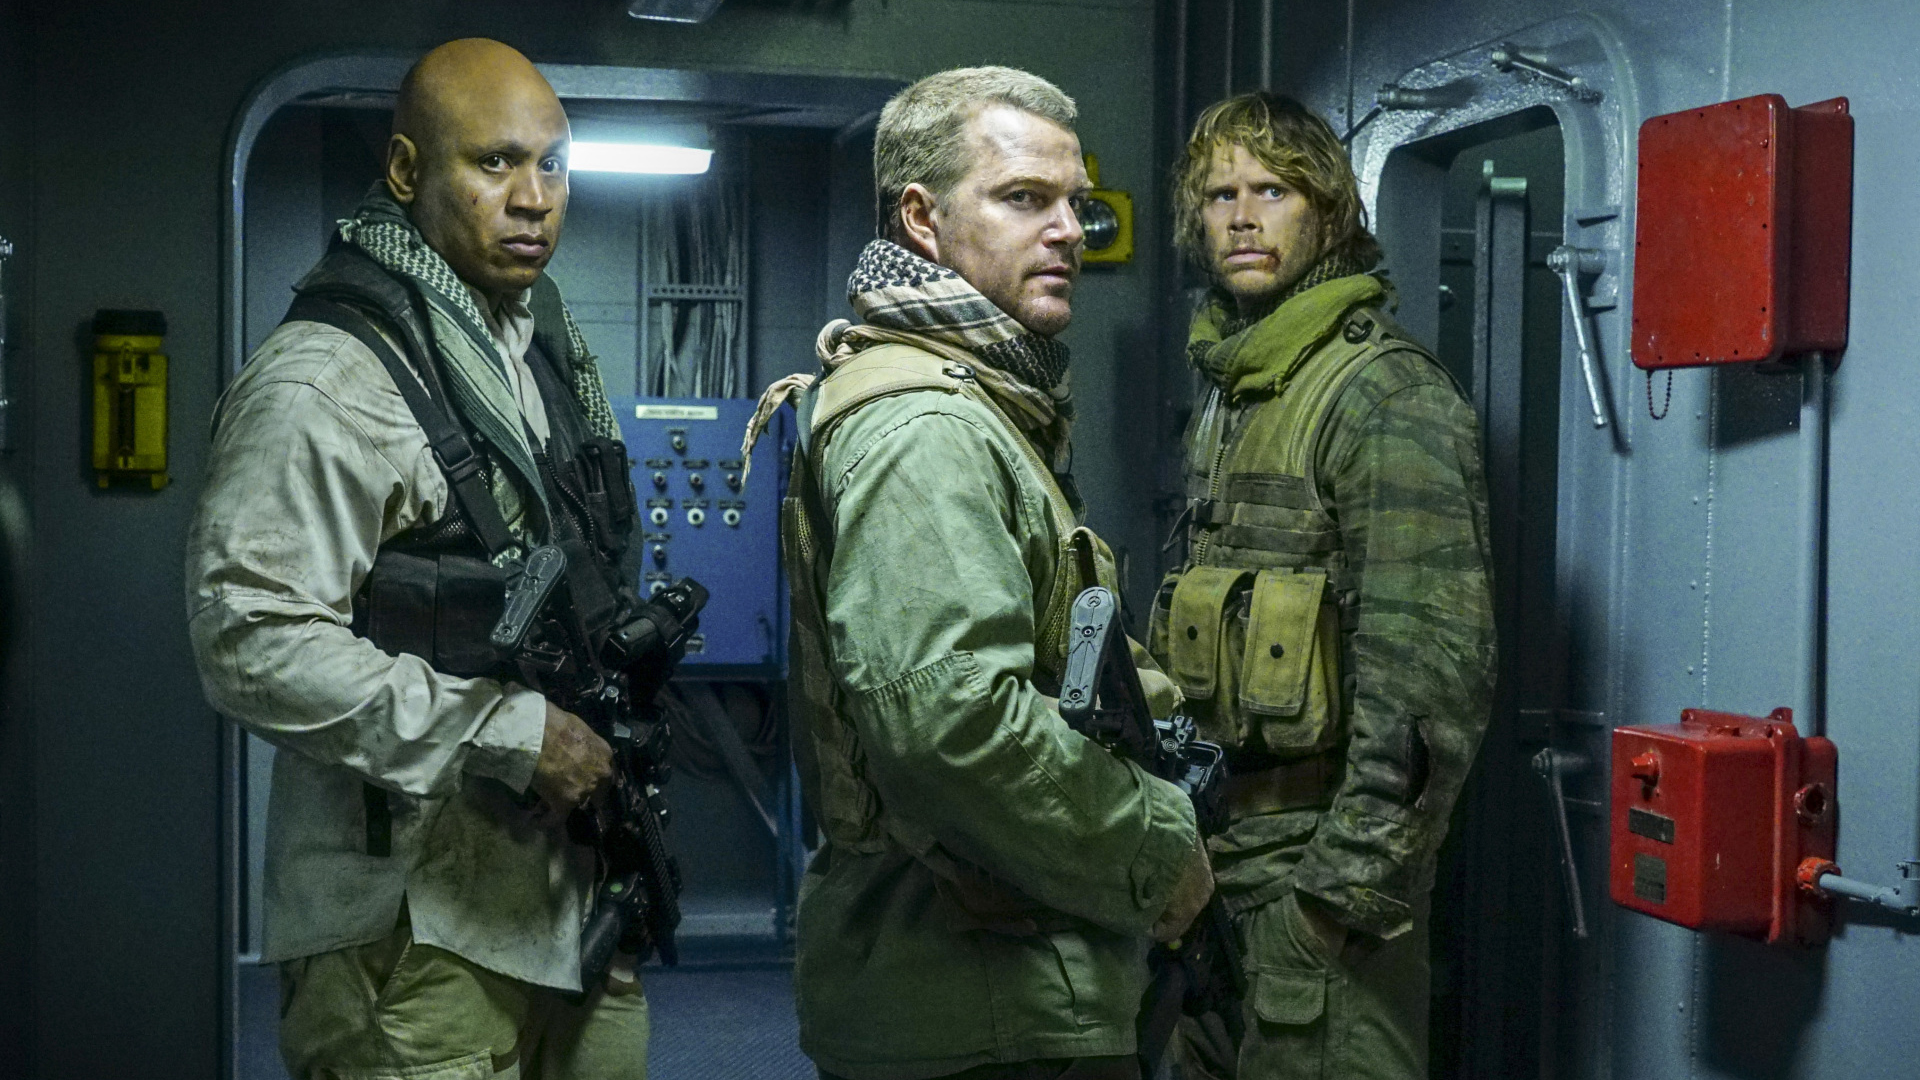 Sam, Callen, and Deeks fully geared up.